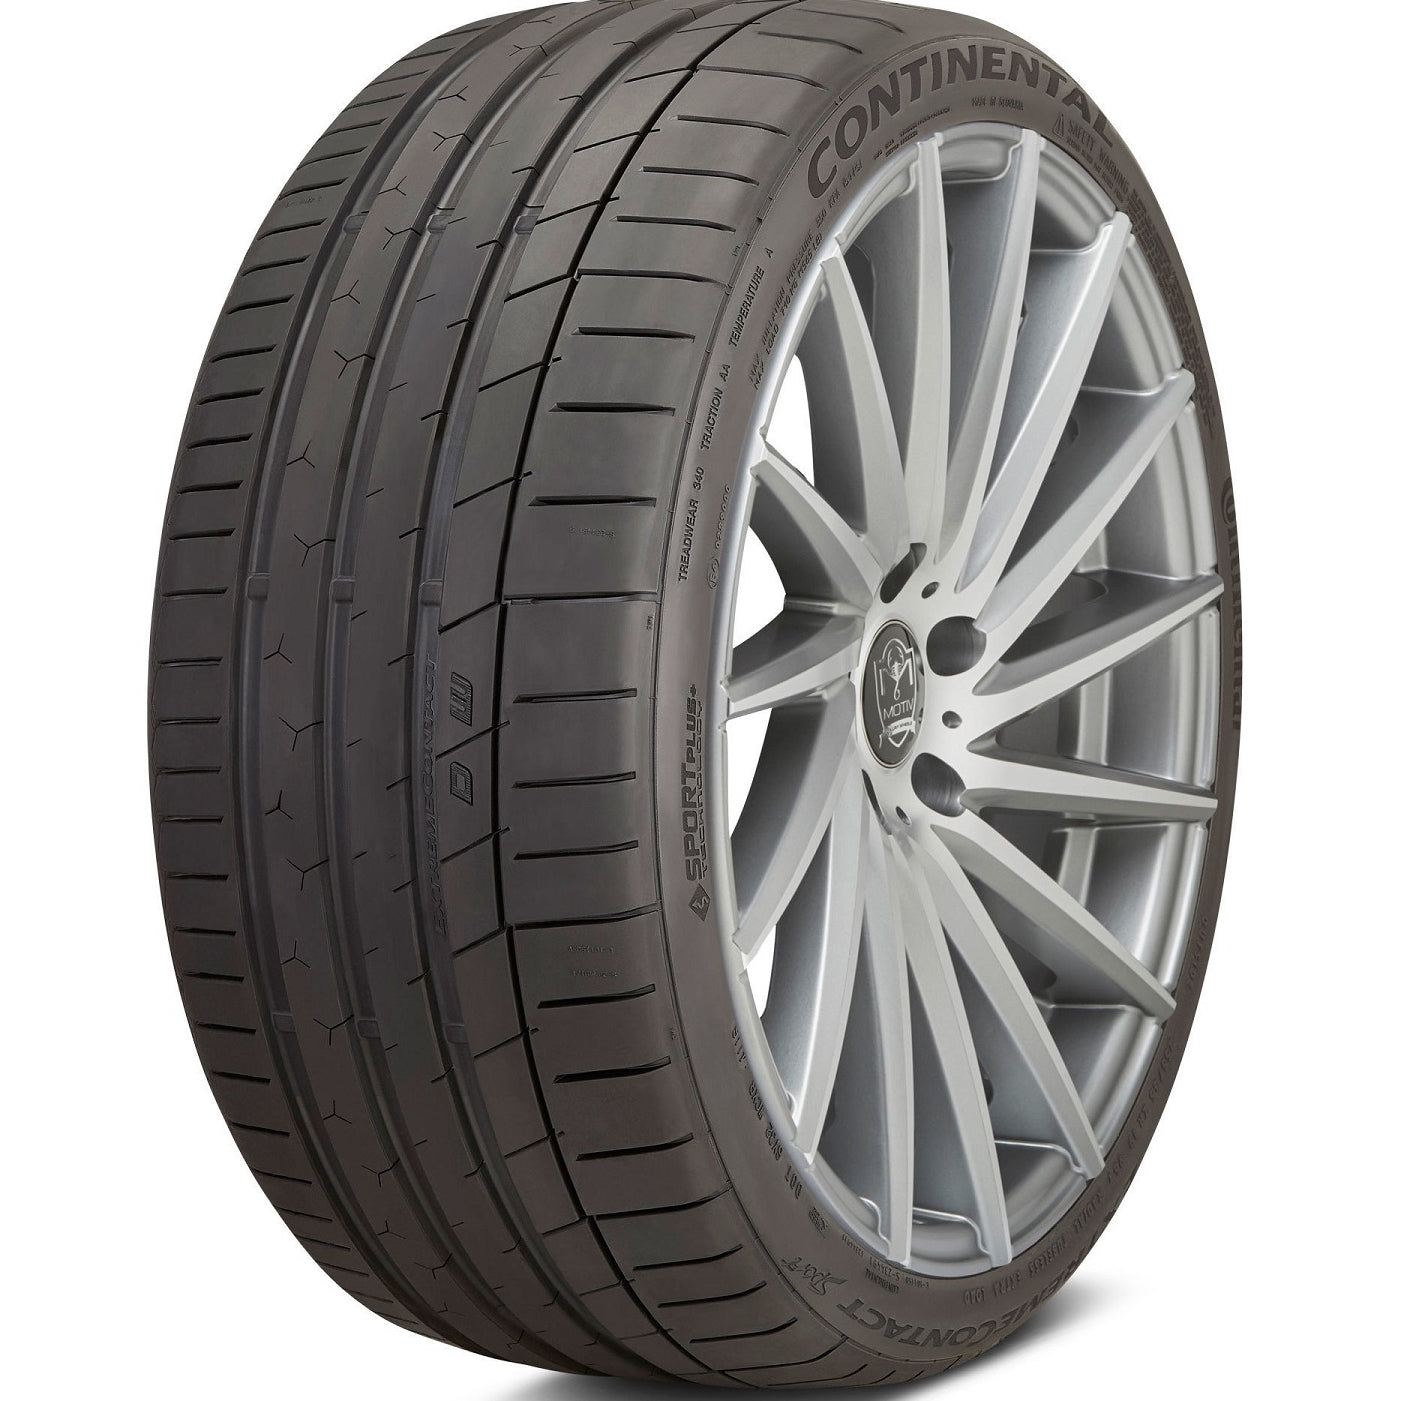 CONTINENTAL EXTREMECONTACT SPORT 265/35ZR20 (27.3X10.4R 20) Tires